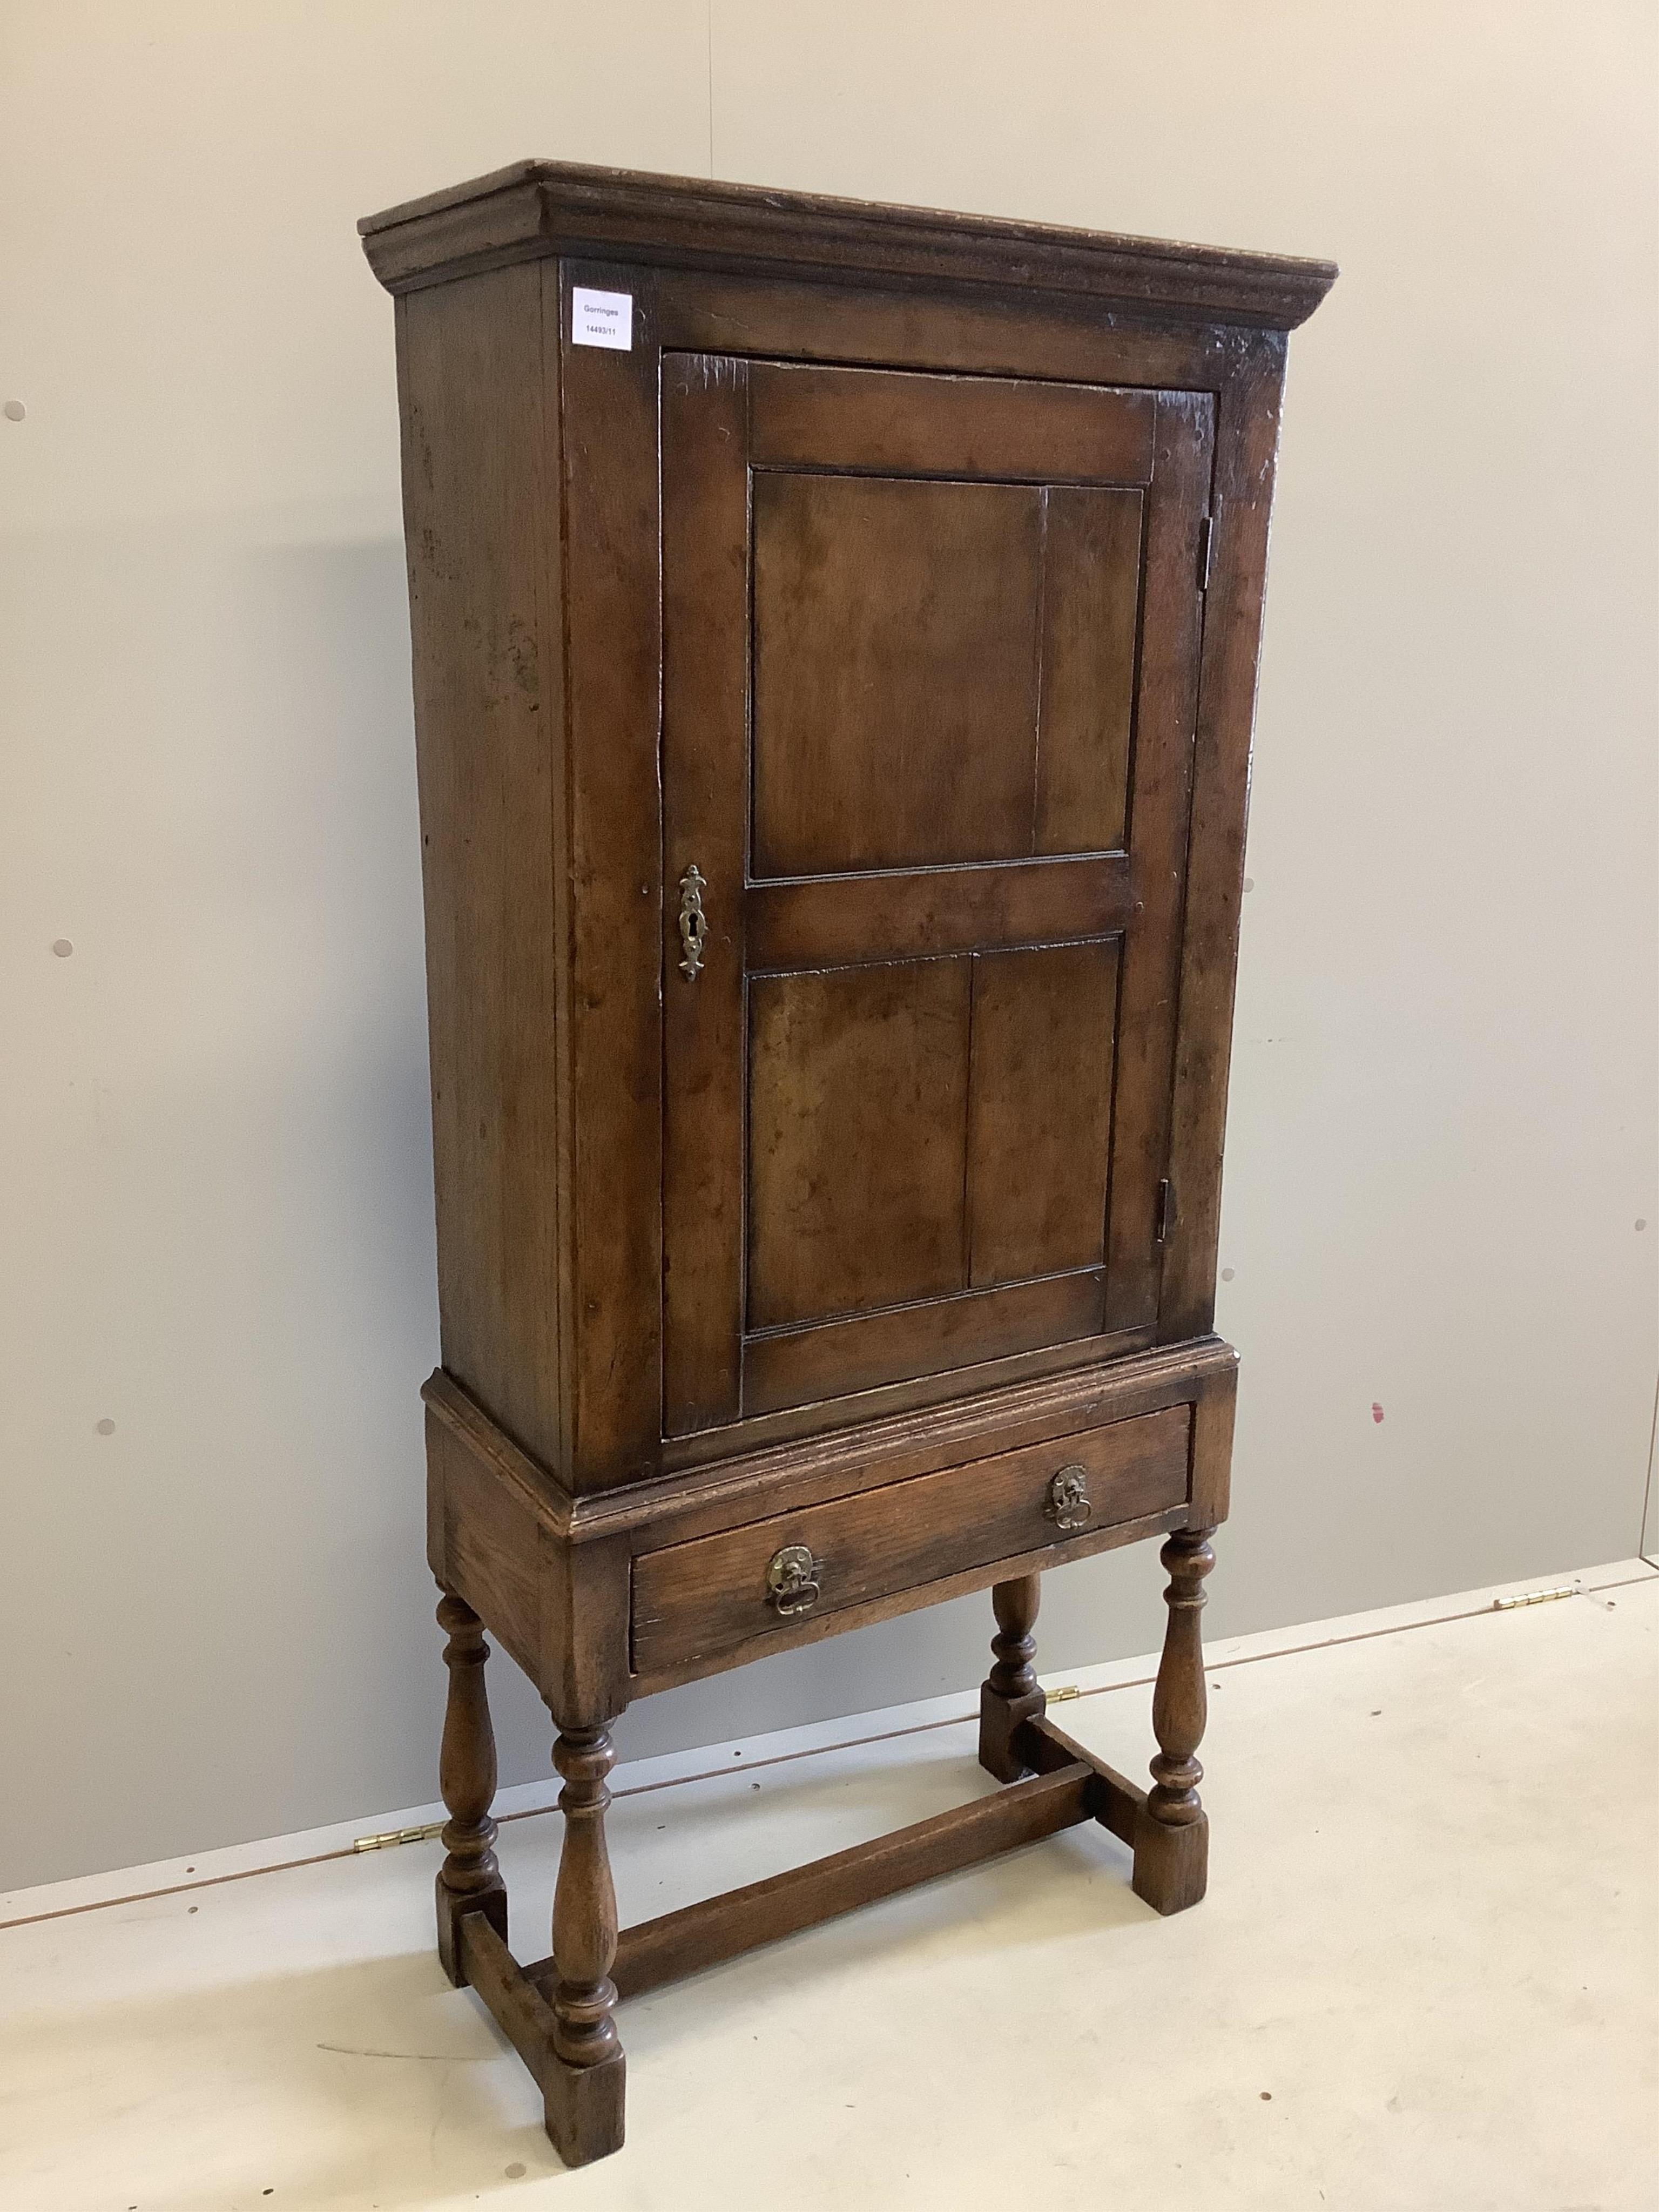 A 17th century style oak cupboard on stand, width 67cm, depth 29cm, height 143cm. Condition - good